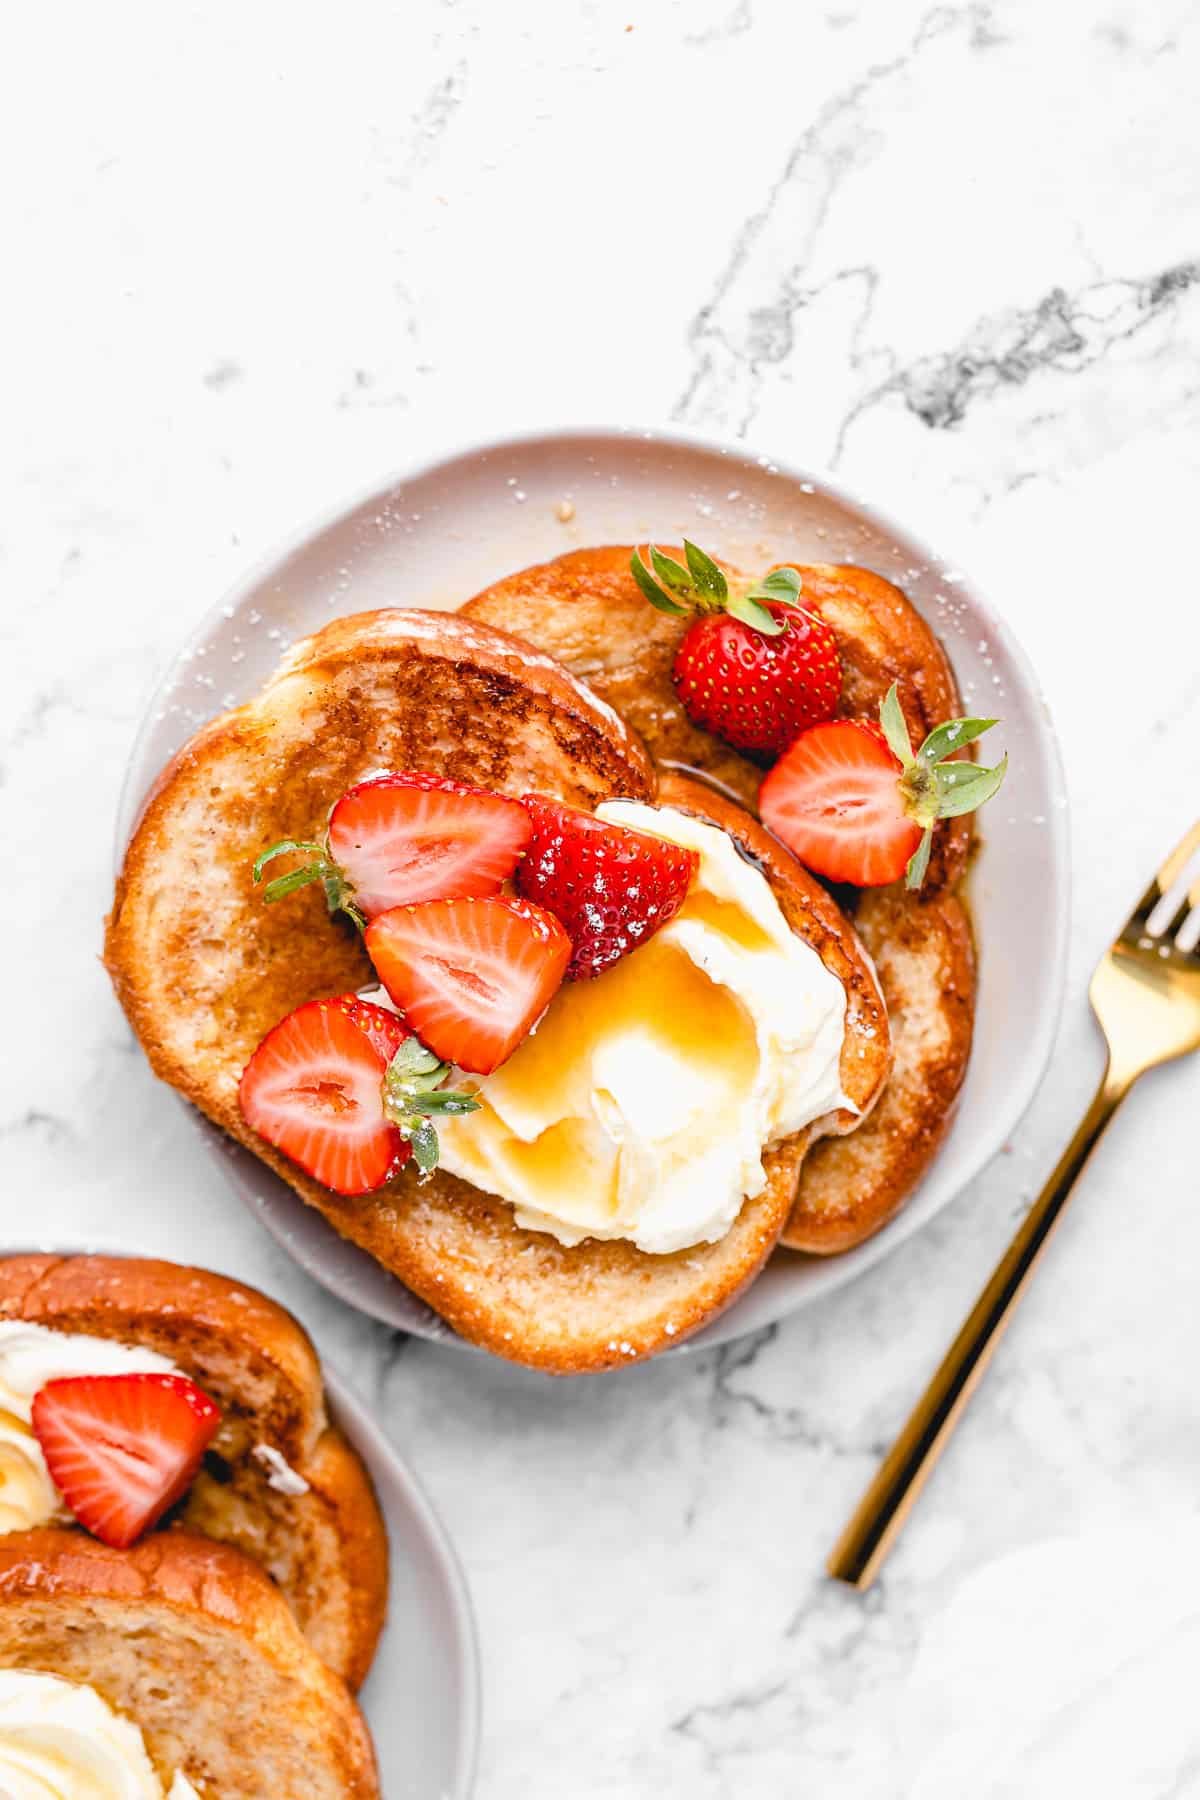 Vegan french toast with sliced strawberries.